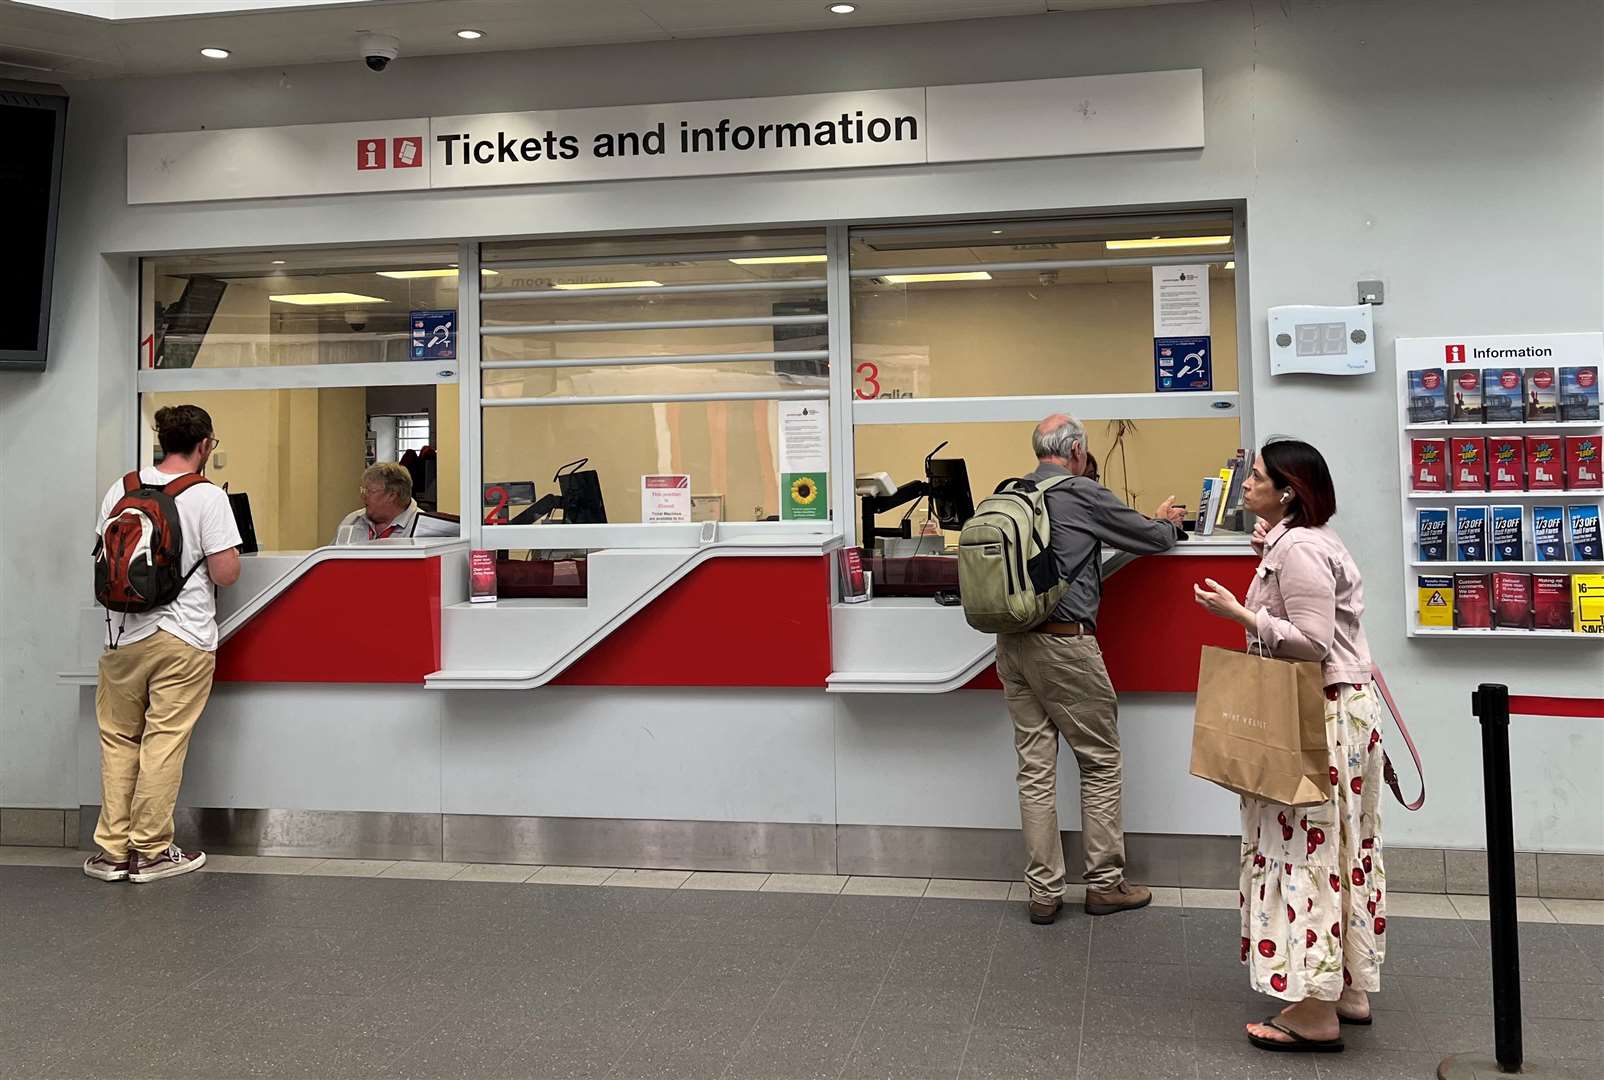 Ticket office staff would be moved to platform roles under the plans